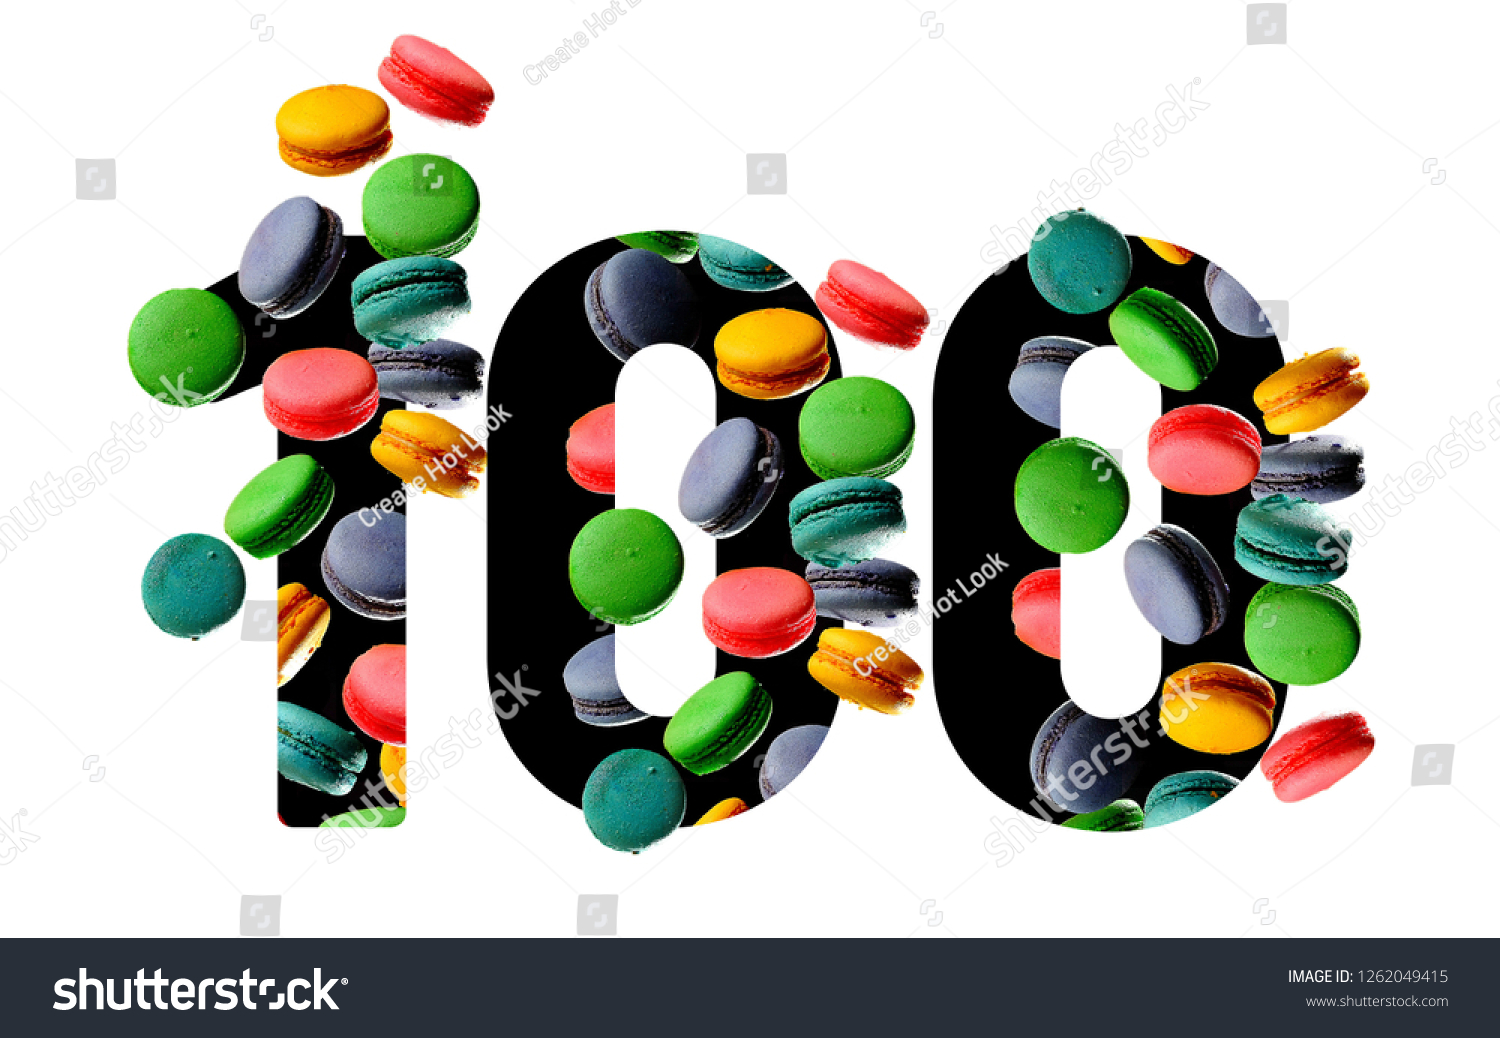 100-number-one-hundred-graphic-black-stock-photo-1262049415-shutterstock